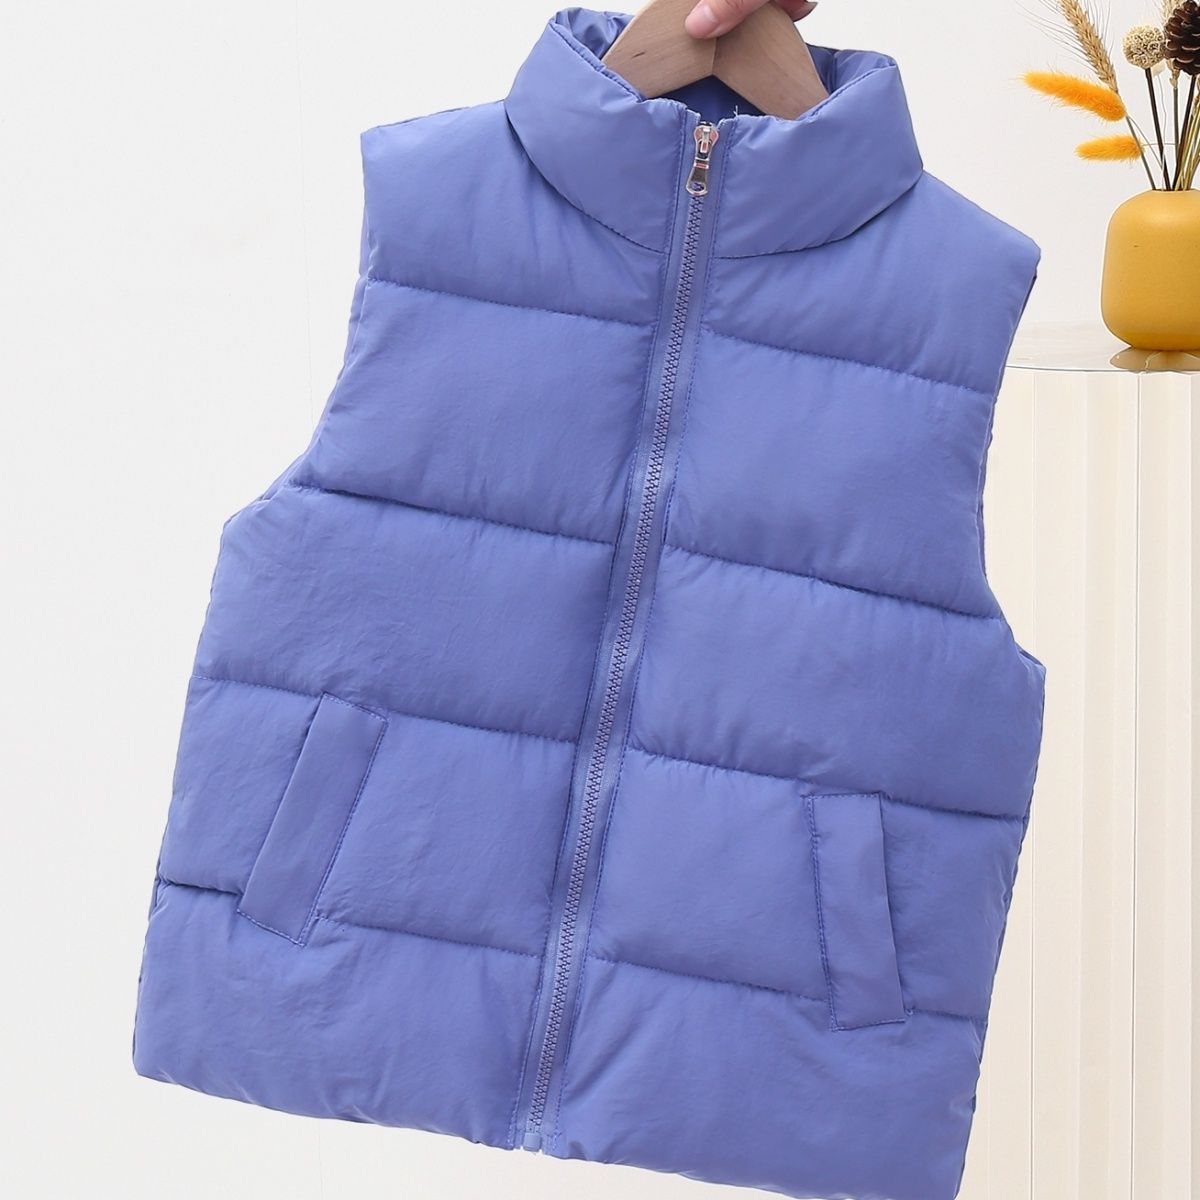 New autumn and winter children's down cotton vest children's middle and big children's vest boys and girls cotton vest printed vest shoulder stand collar